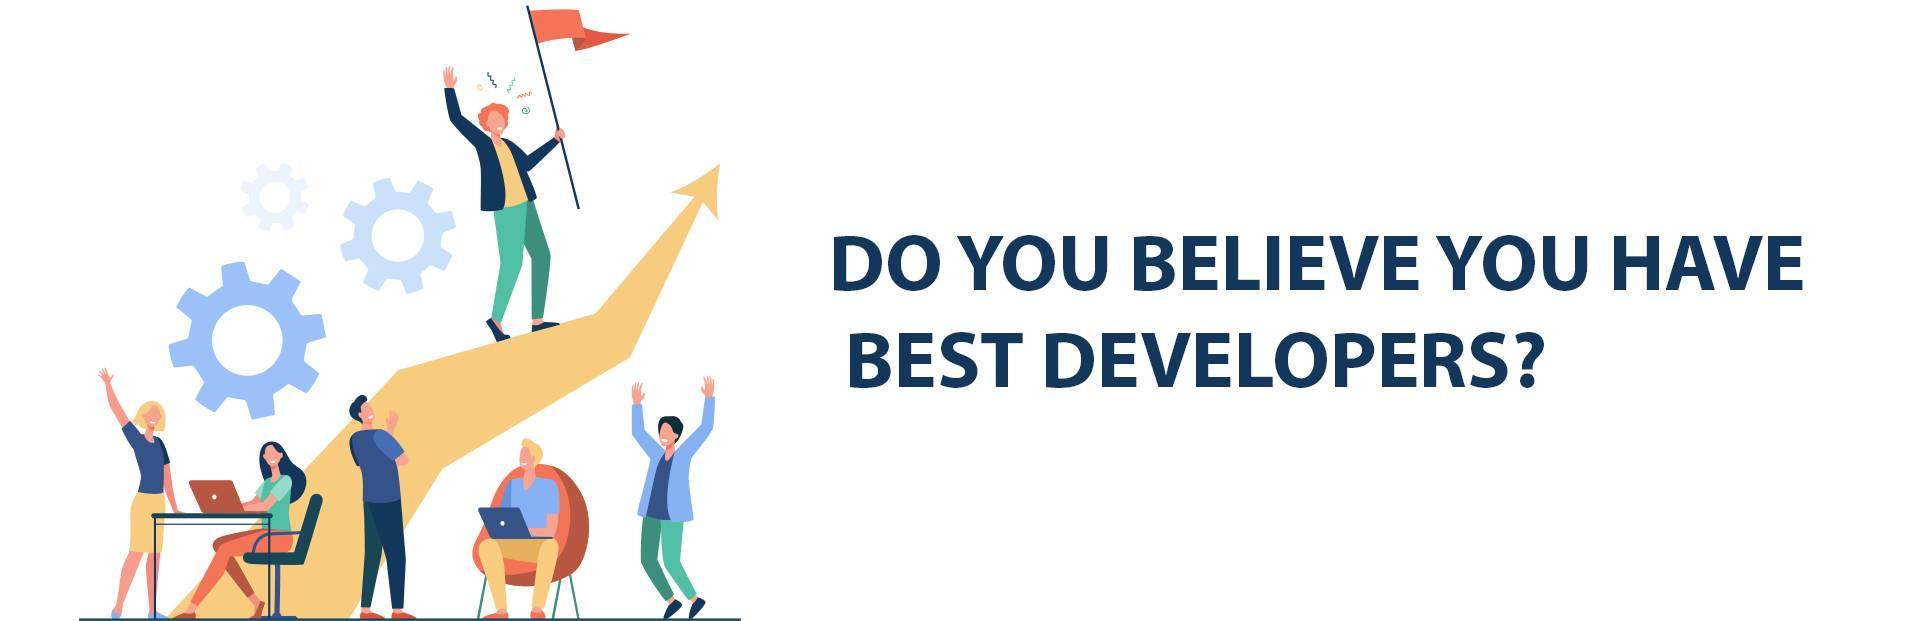 If you believe your developers are the best, you are making a mistake. Learn why?